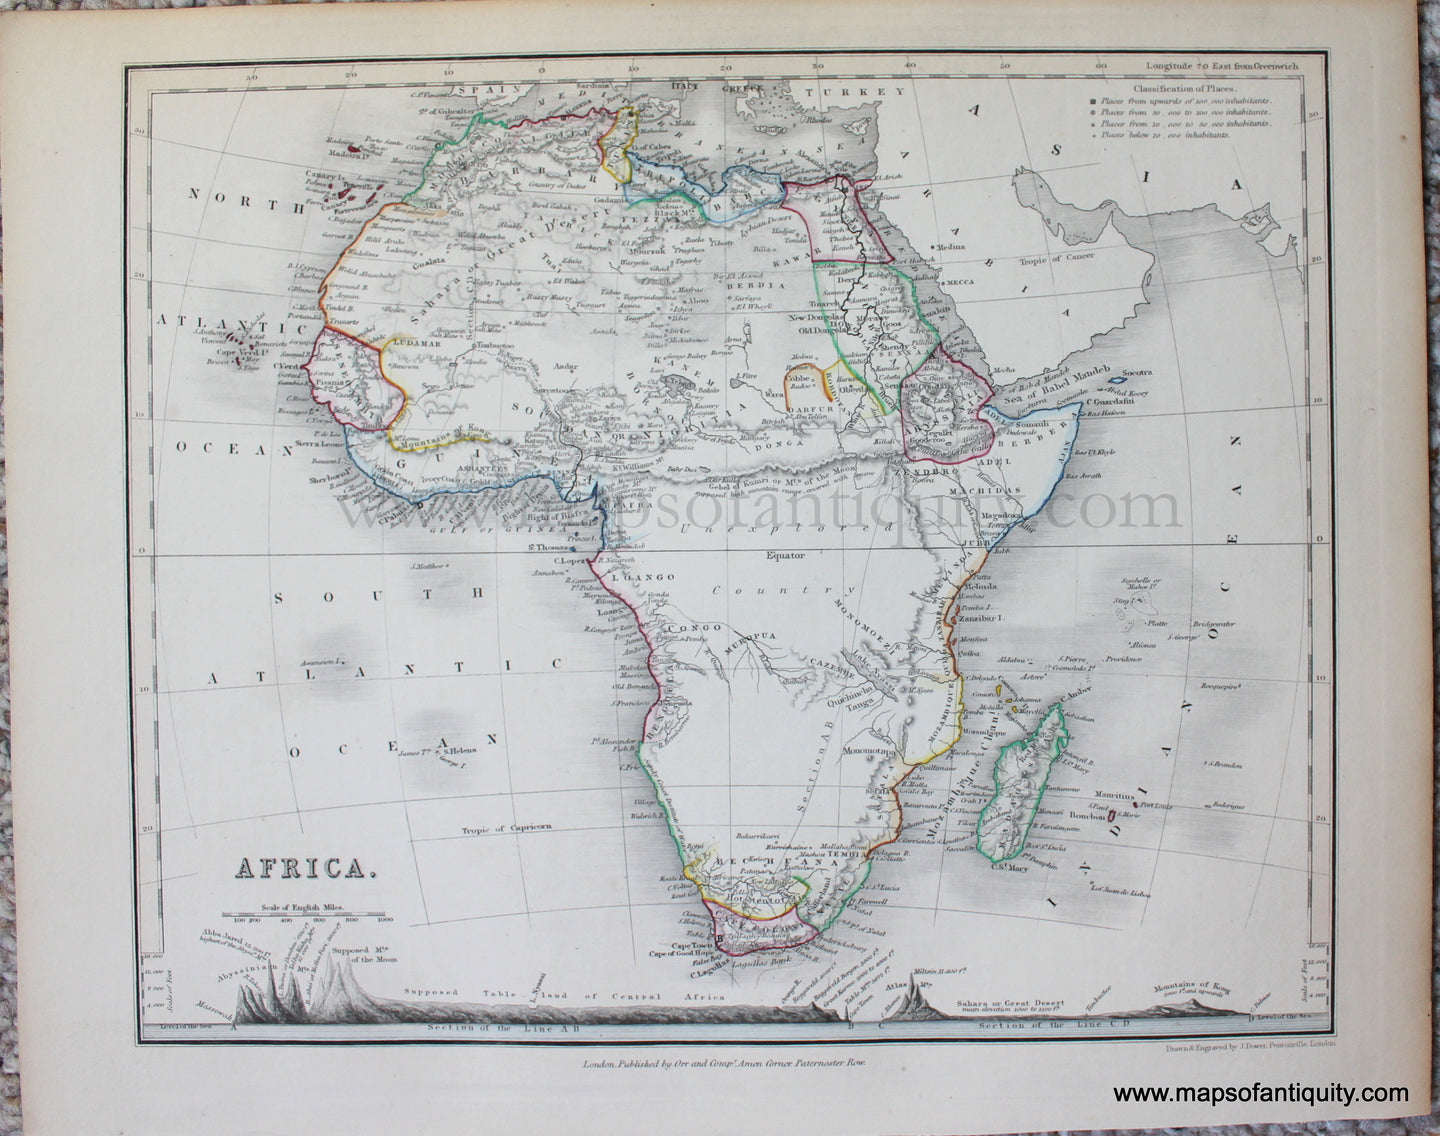 Genuine-Antique-Map-Africa-Africa--1850-Petermann-/-Orr-/-Dower-Maps-Of-Antiquity-1800s-19th-century